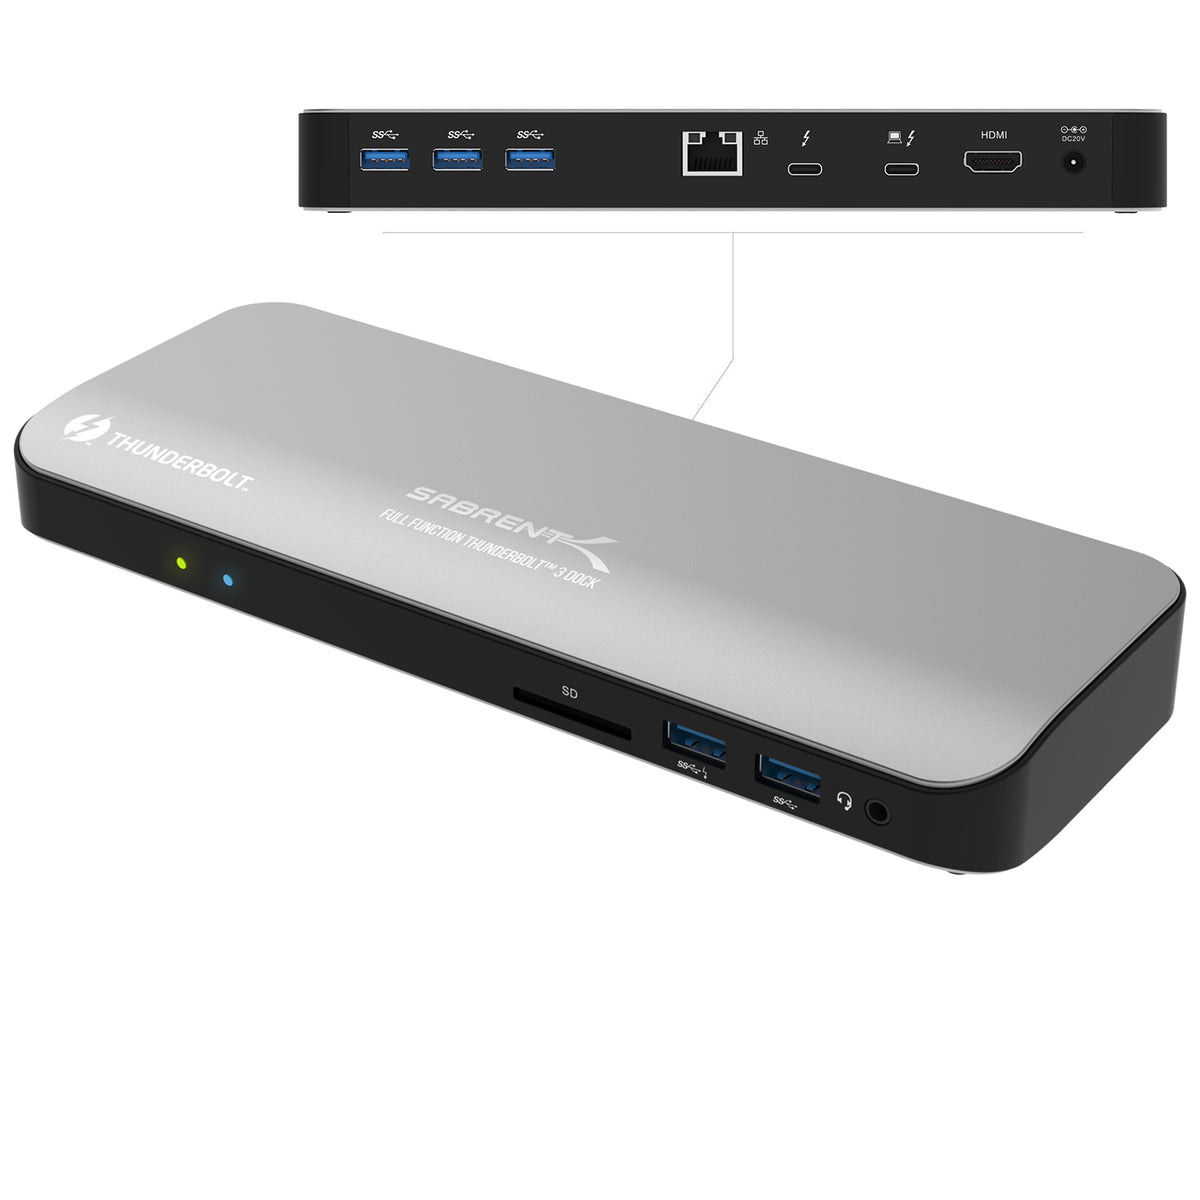 Thunderbolt 3 Docking Station with Power Delivery up to 60W Charging - Dual-4K Display